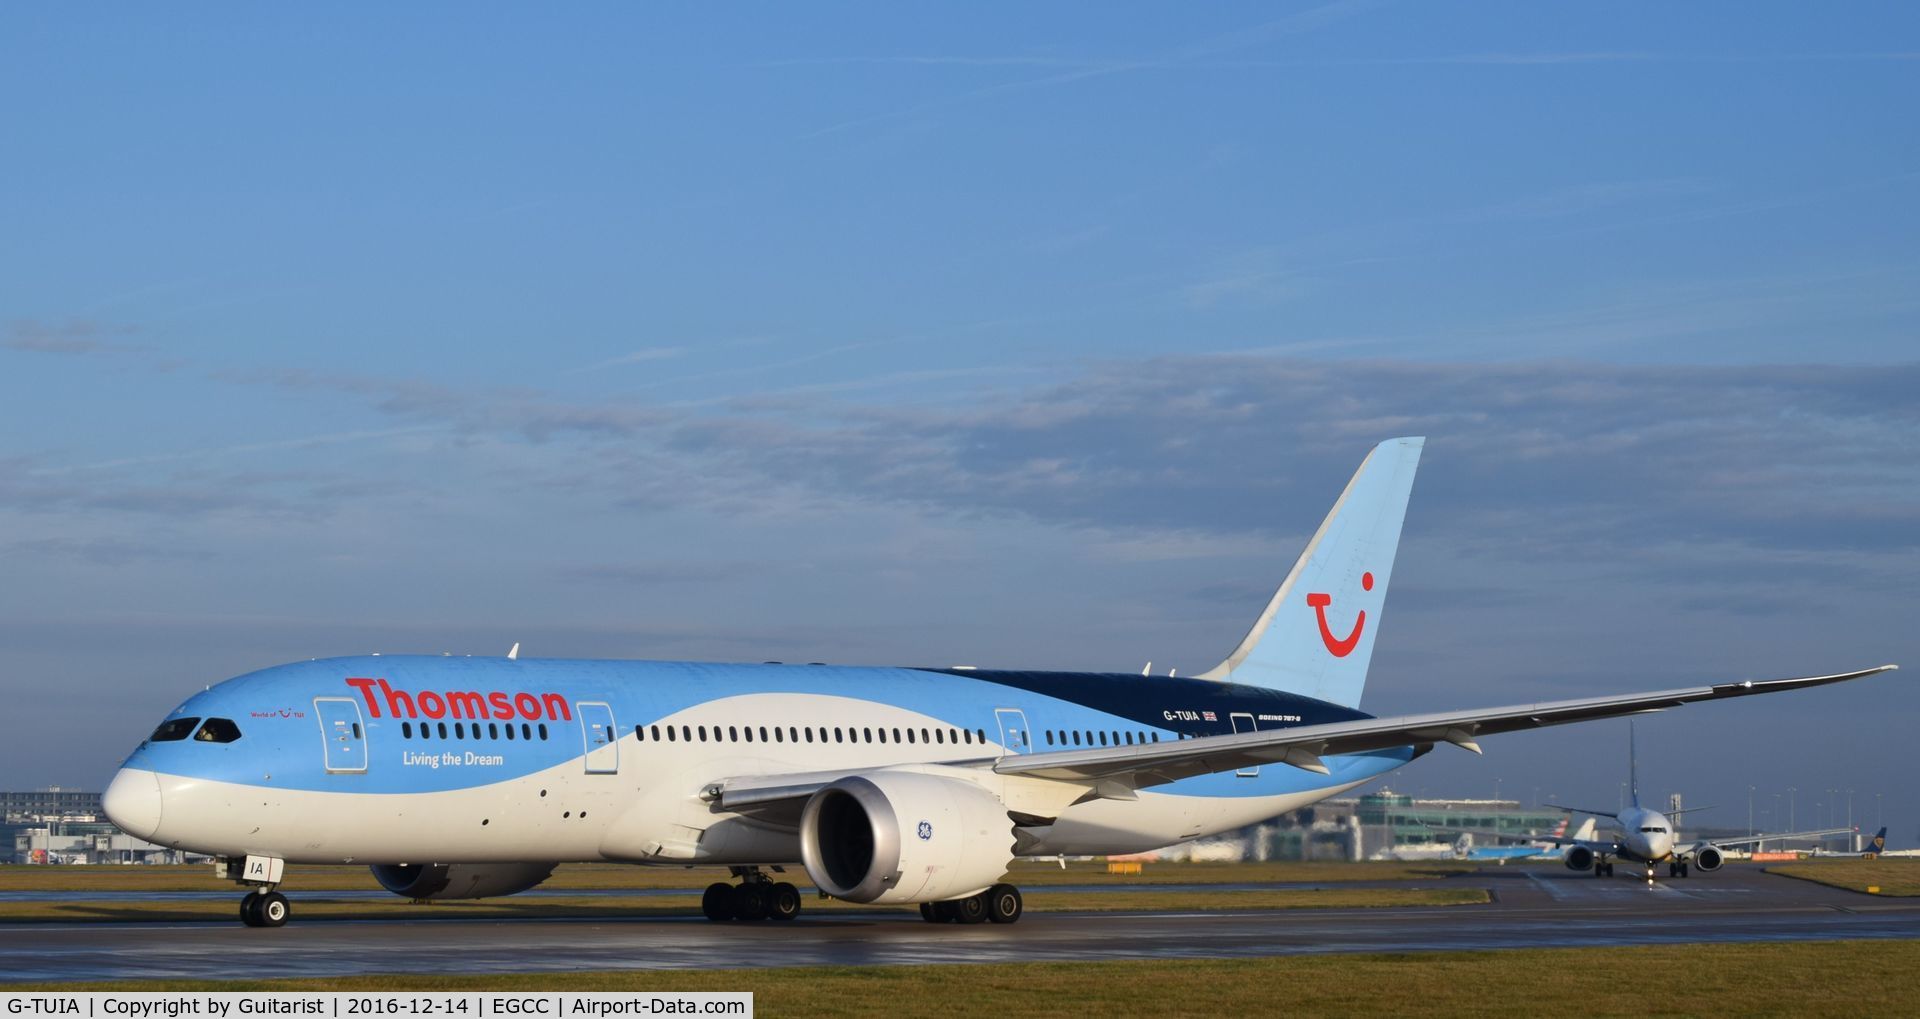 G-TUIA, 2013 Boeing 787-8 Dreamliner C/N 34422, At Manchester